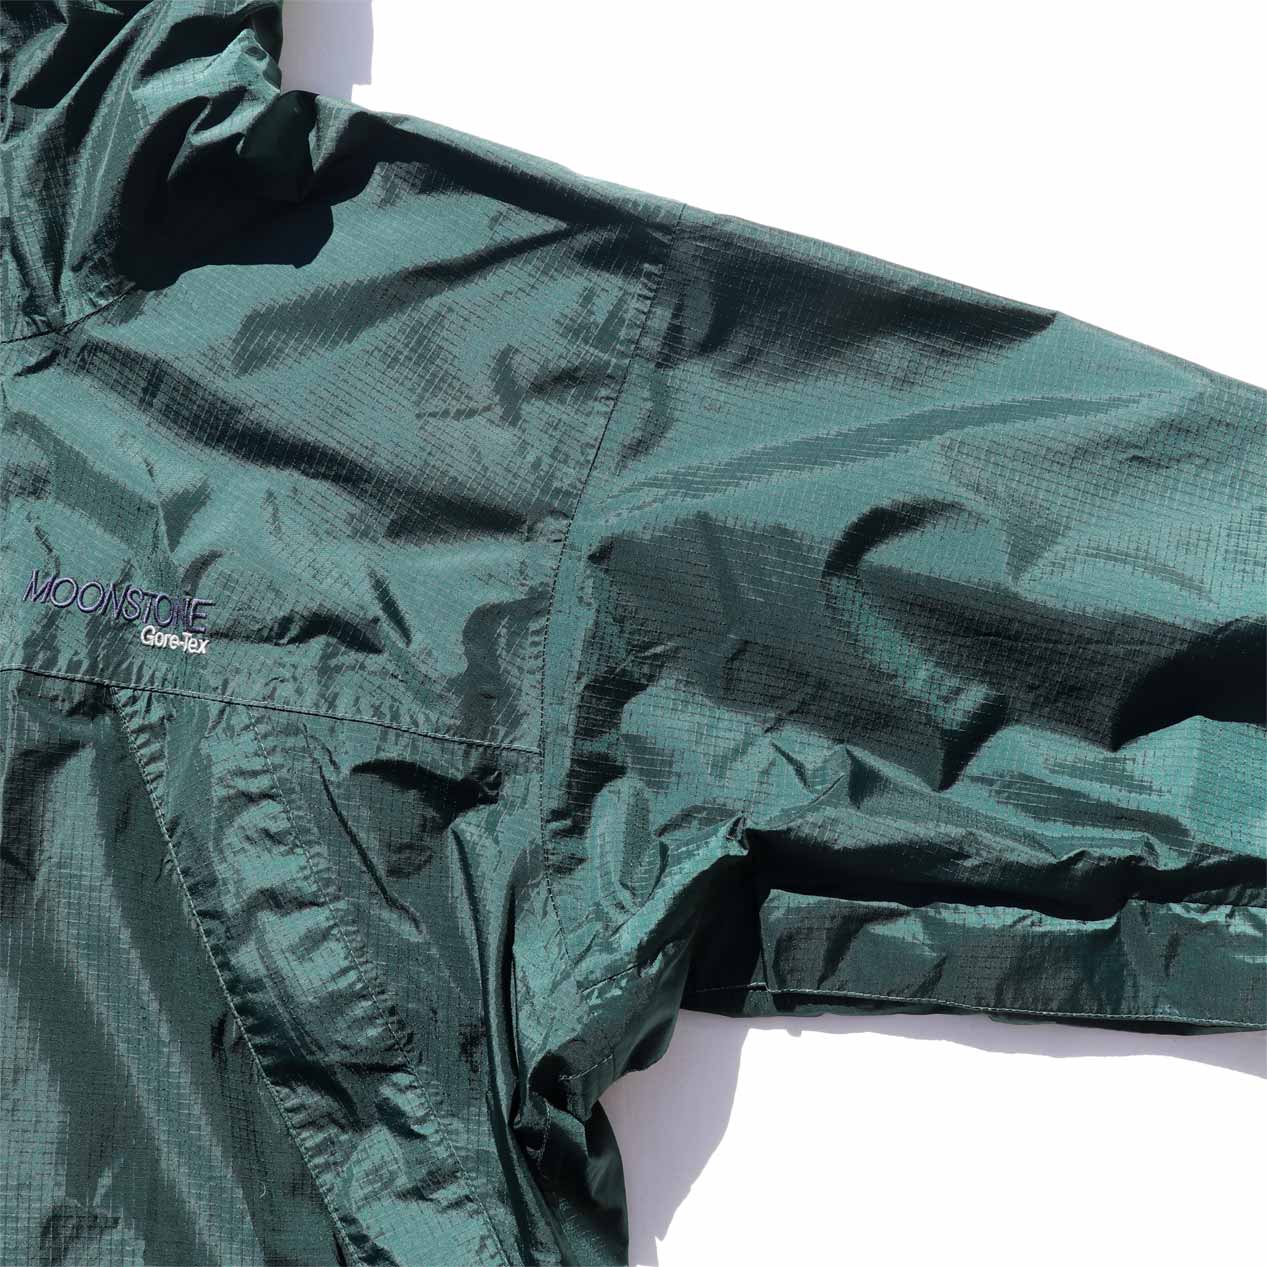 POST JUNK / 90's MOONSTONE Gore-Tex Rip Stop Nylon Jacket Made In